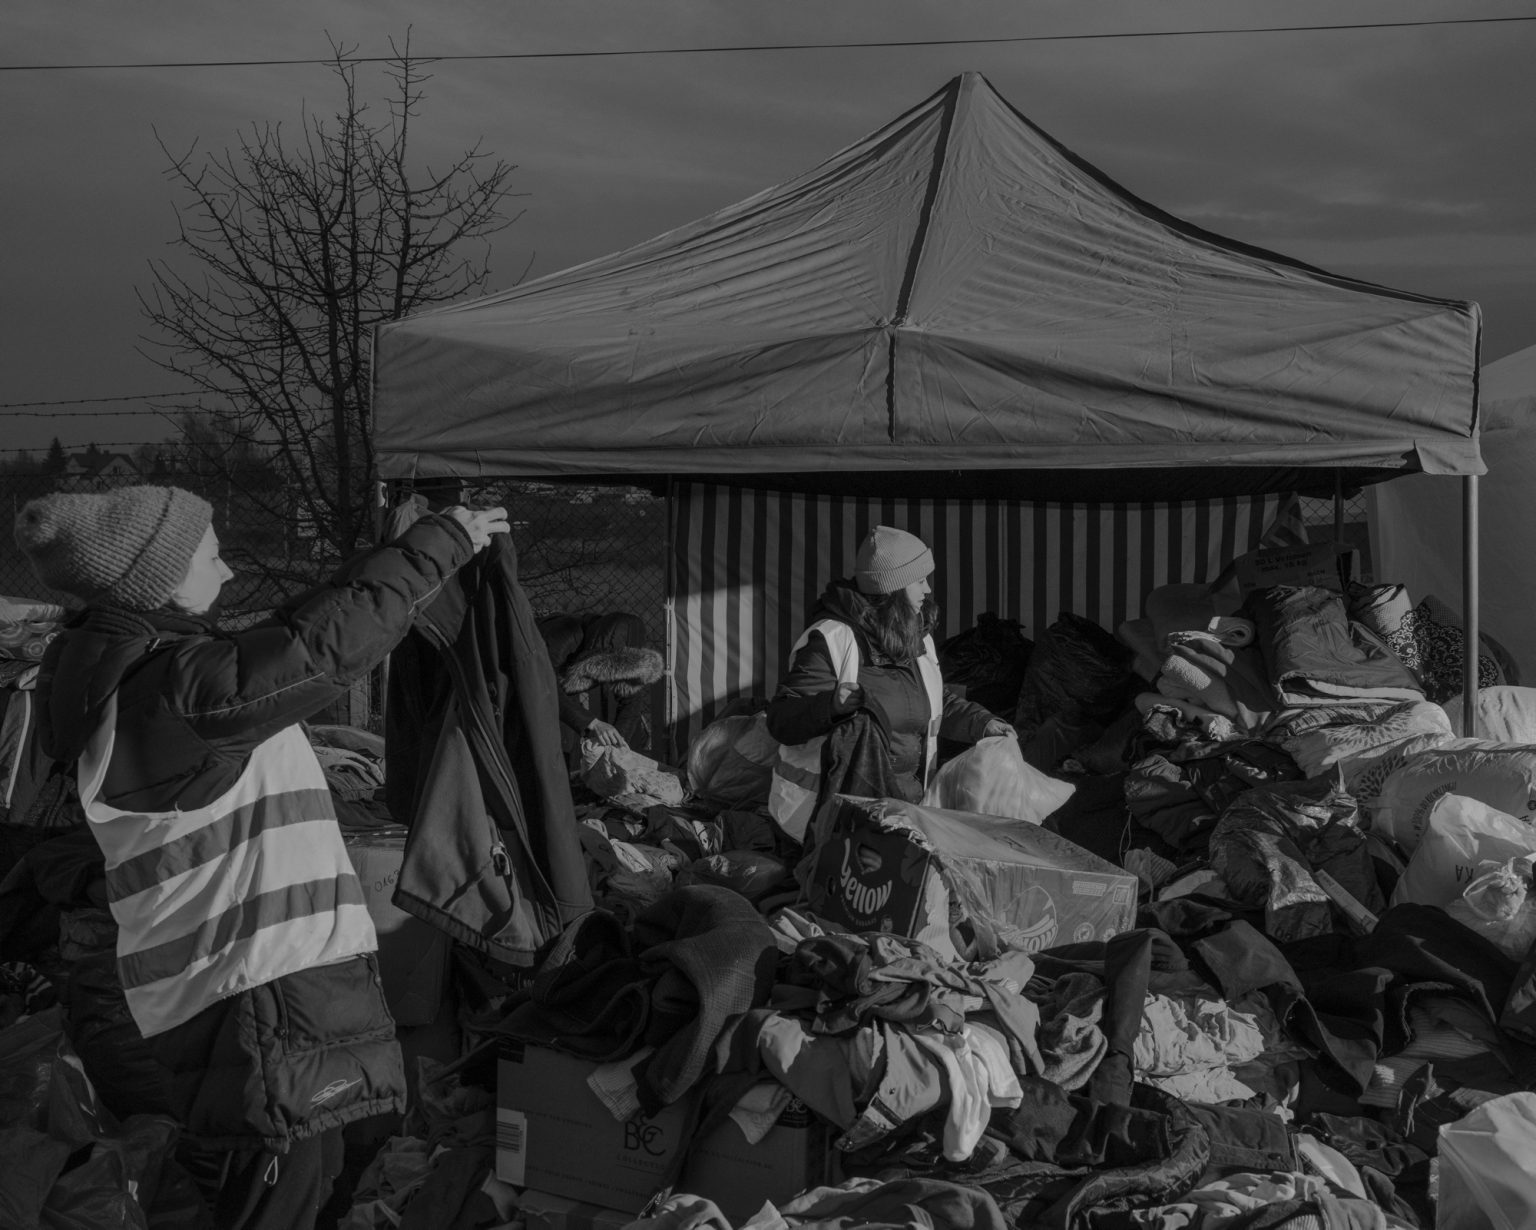 Ukrainian refugees at the Medyka border between Poland and Ukraine. More than 600,000 Ukrainians fleeing the conflict have already crossed this border making Poland the country with the largest number of refugees with one million people welcomed. Here volunteers distributing clothes. Medyka, Poland. March 2022.                                              As Russia invades Ukraine, thousands of Ukrainians are fleeing the country to find shelter in bordering countries. 
---------
Con l'invasione russa ai danni dell'Ucraina, migliaia di ucraini sono in fuga dalla nazione d'origine per cercare rifugio nelle nazioni confinanti.